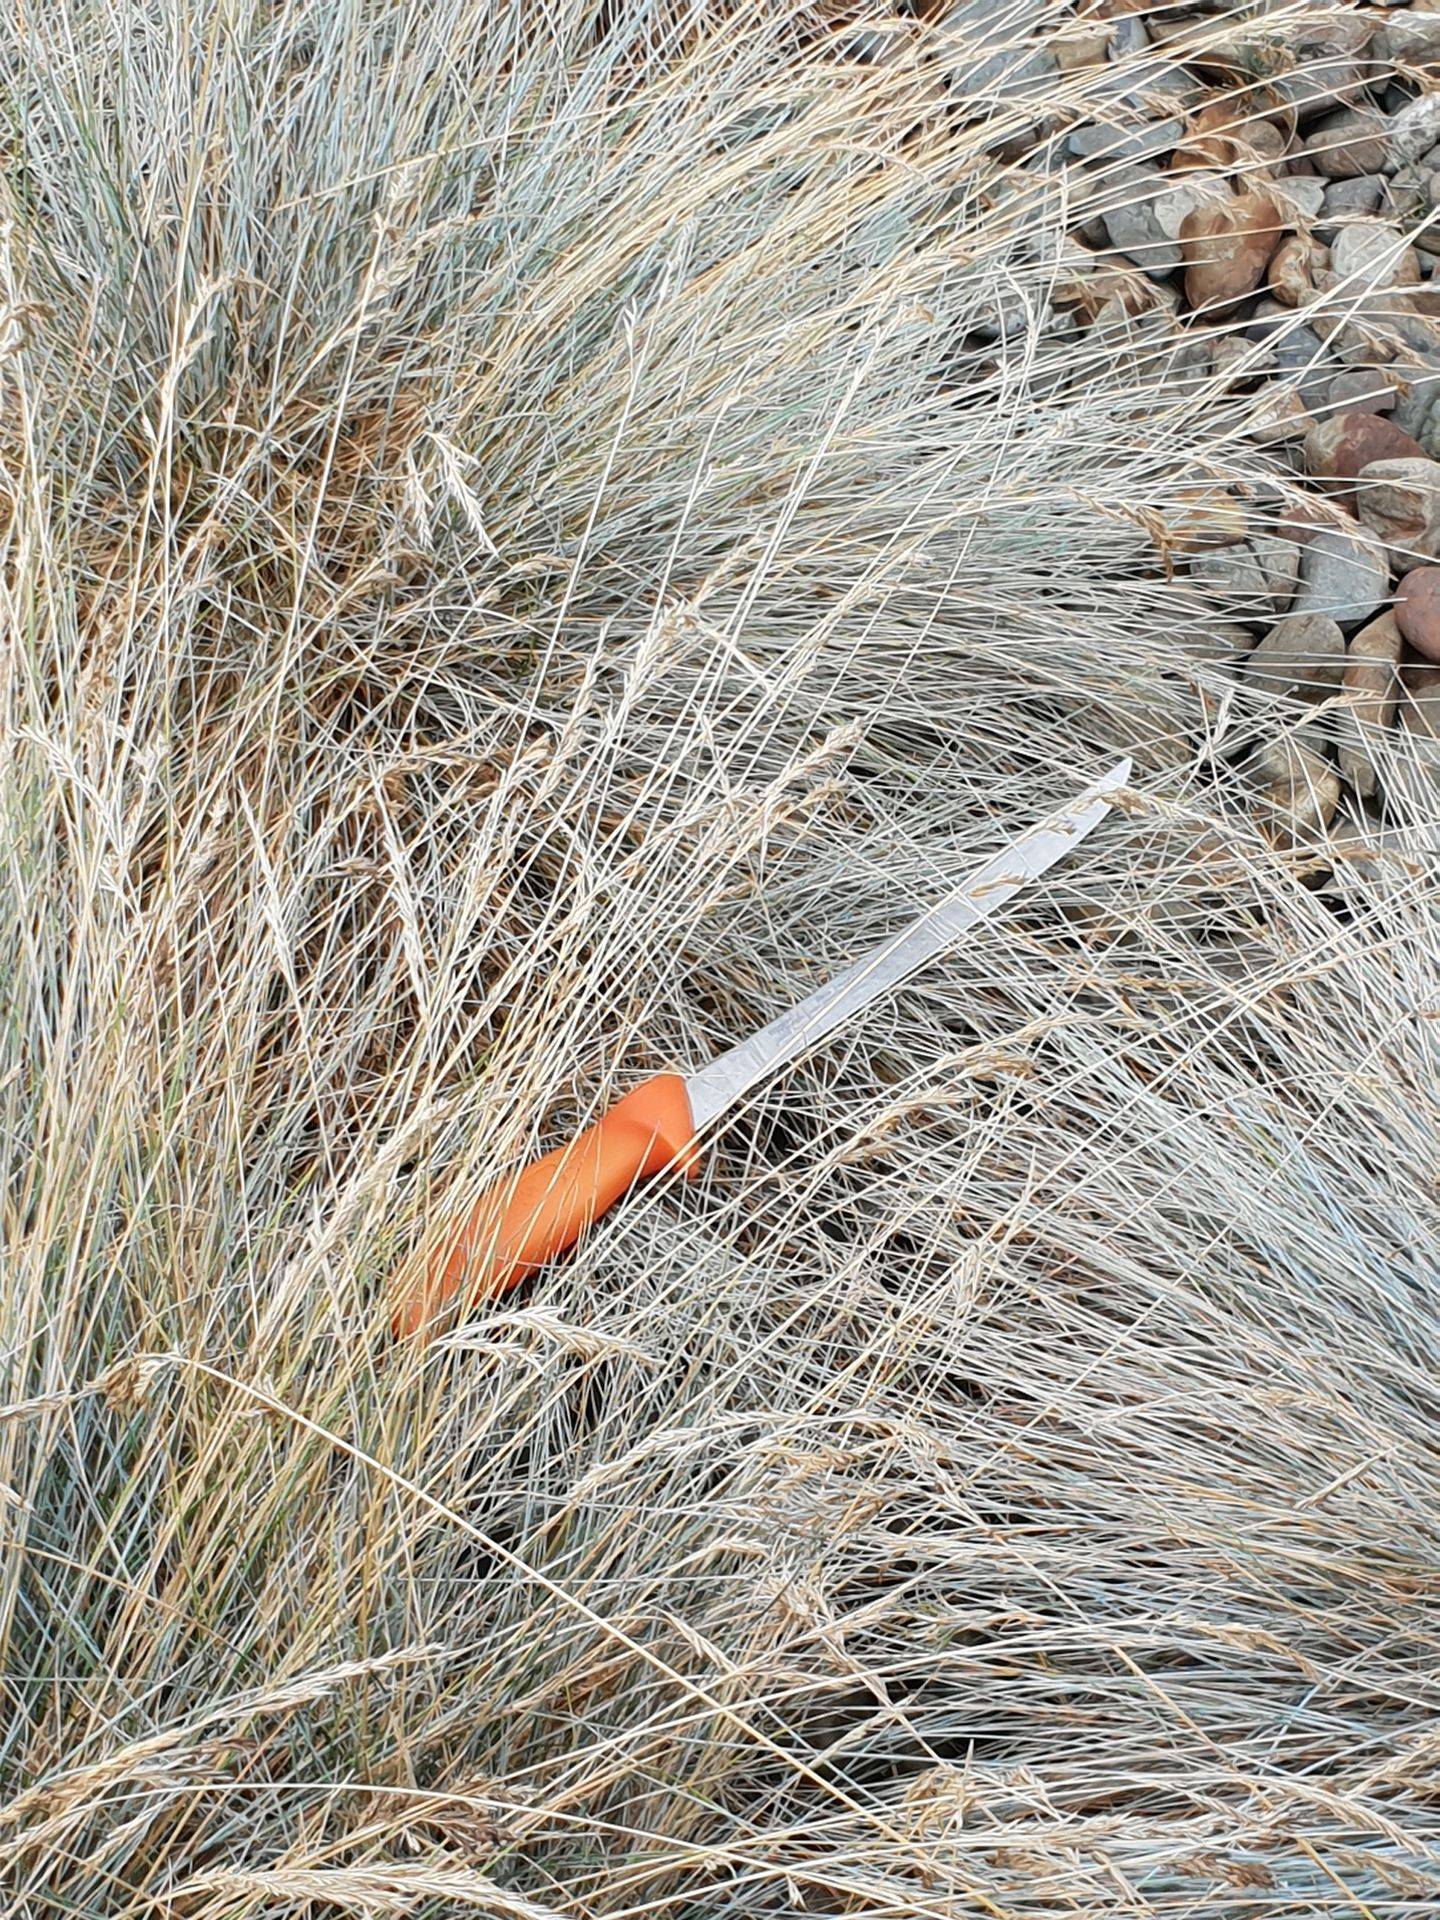 The homeowner found a knife discarded in grass after chasing a meth-crazed intruder who was...